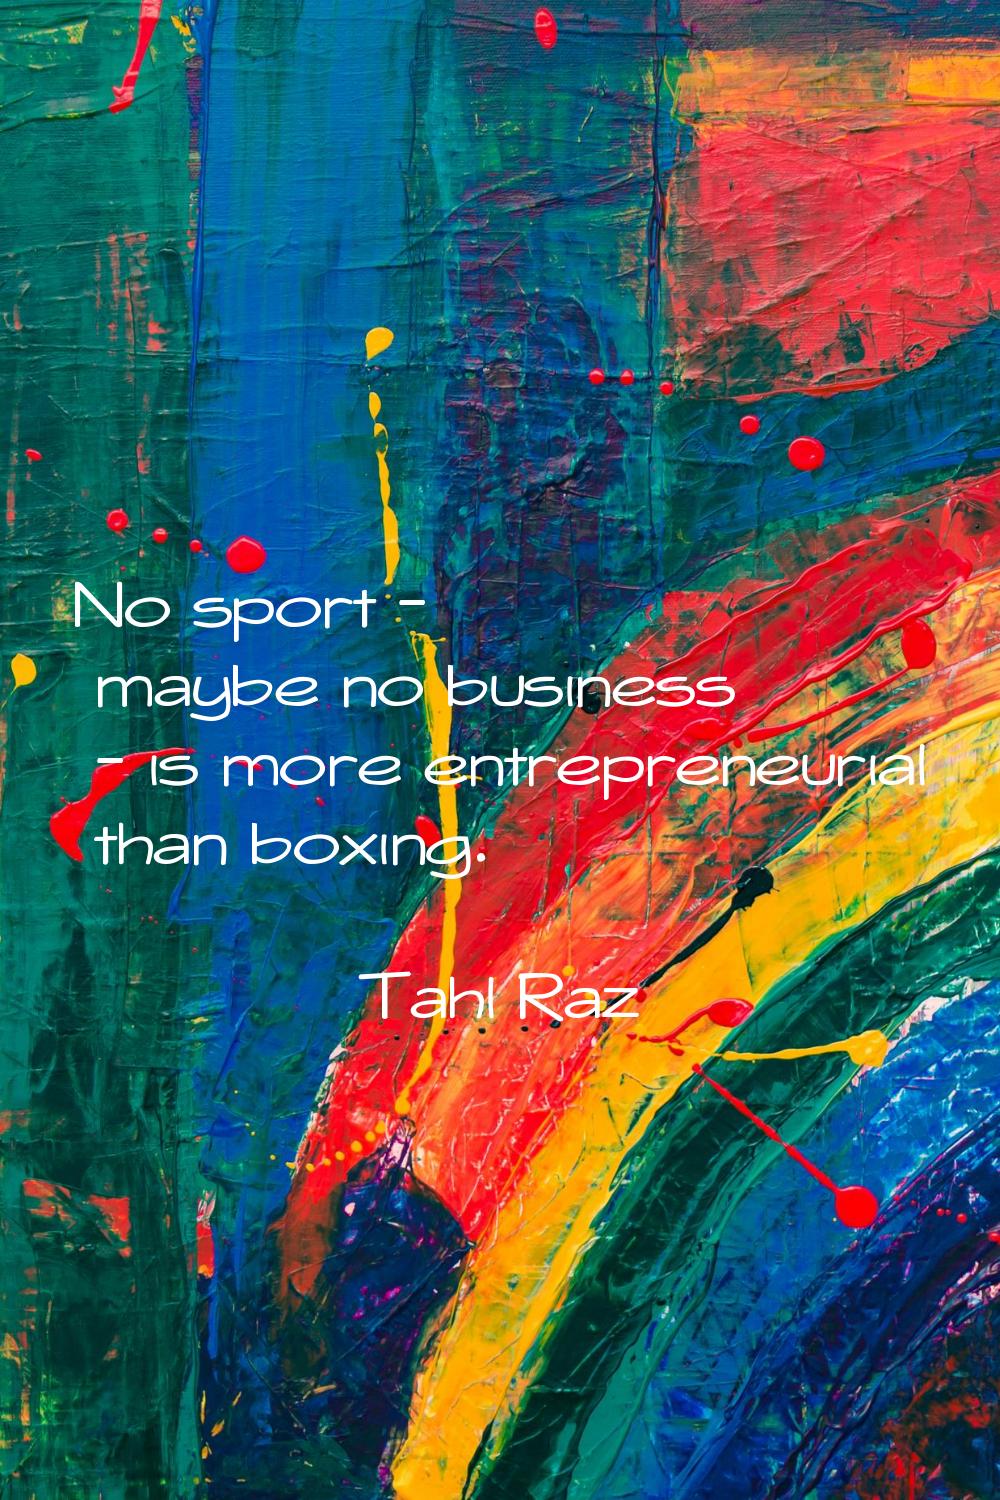 No sport - maybe no business - is more entrepreneurial than boxing.